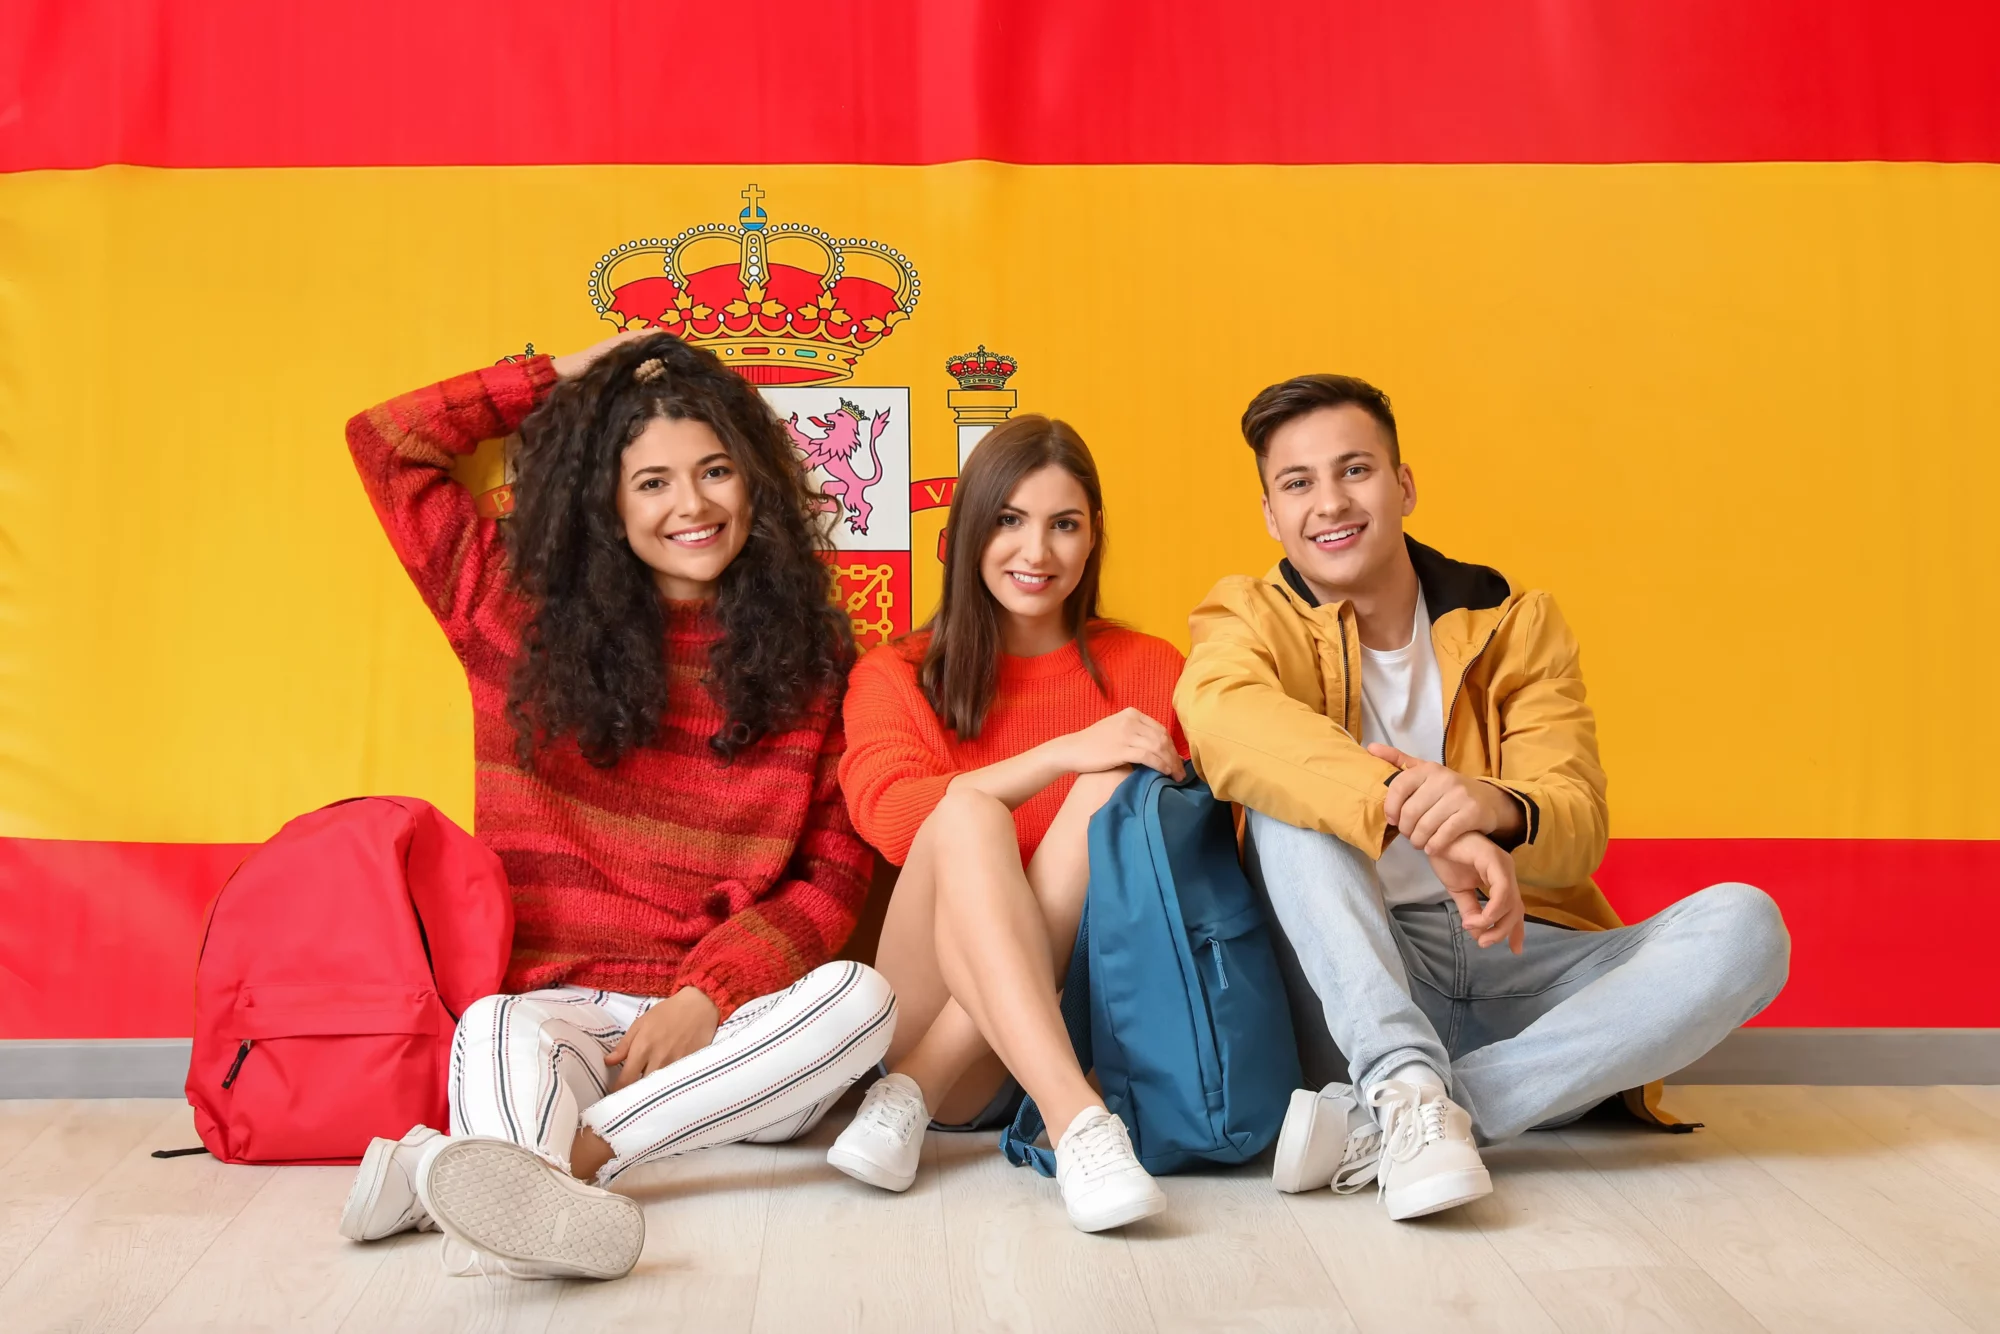 Three young people sitting in front of the flag of Spain